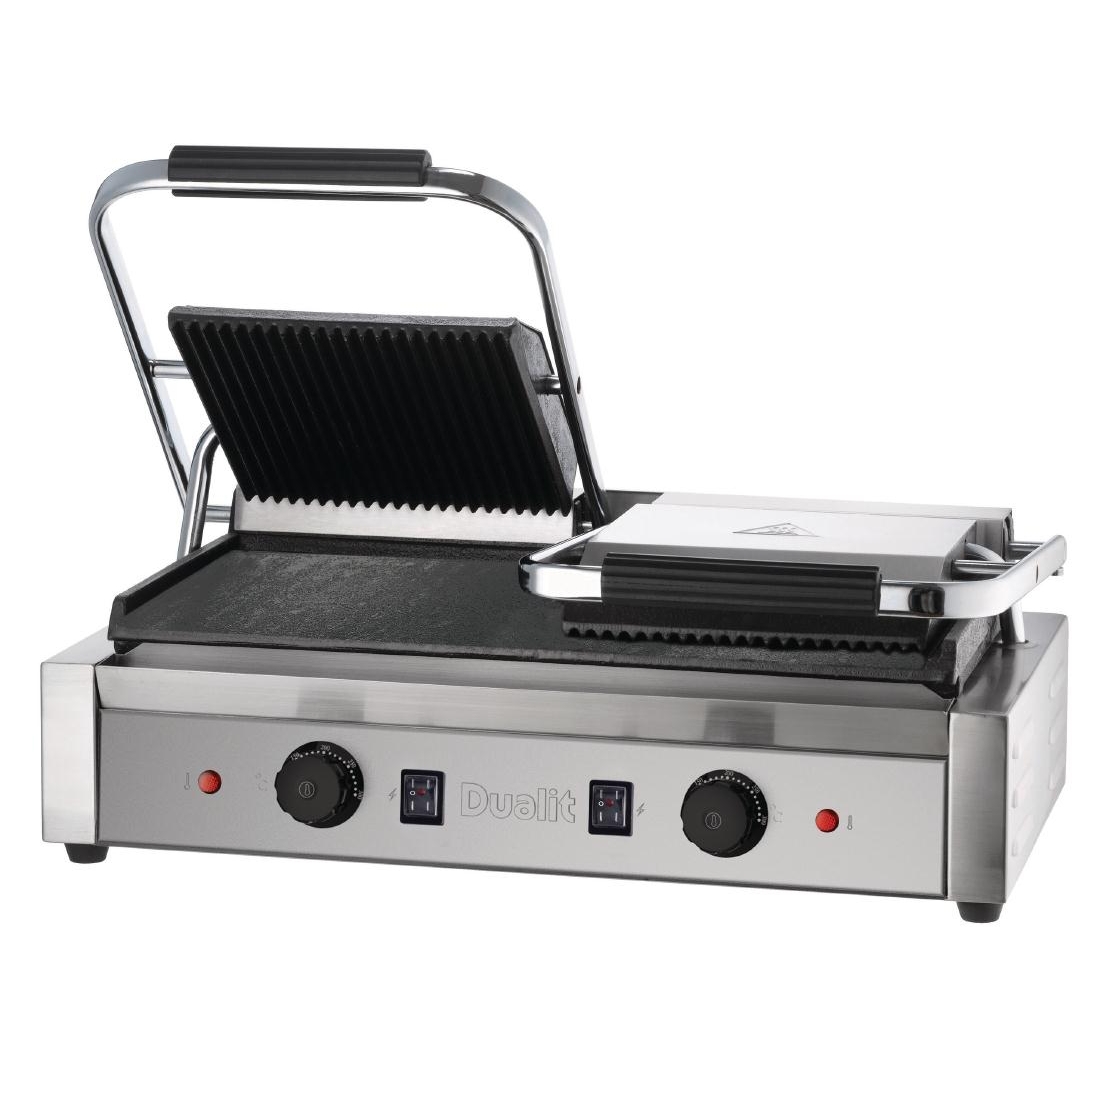 Dualit Double Panini Contact Grill 96002